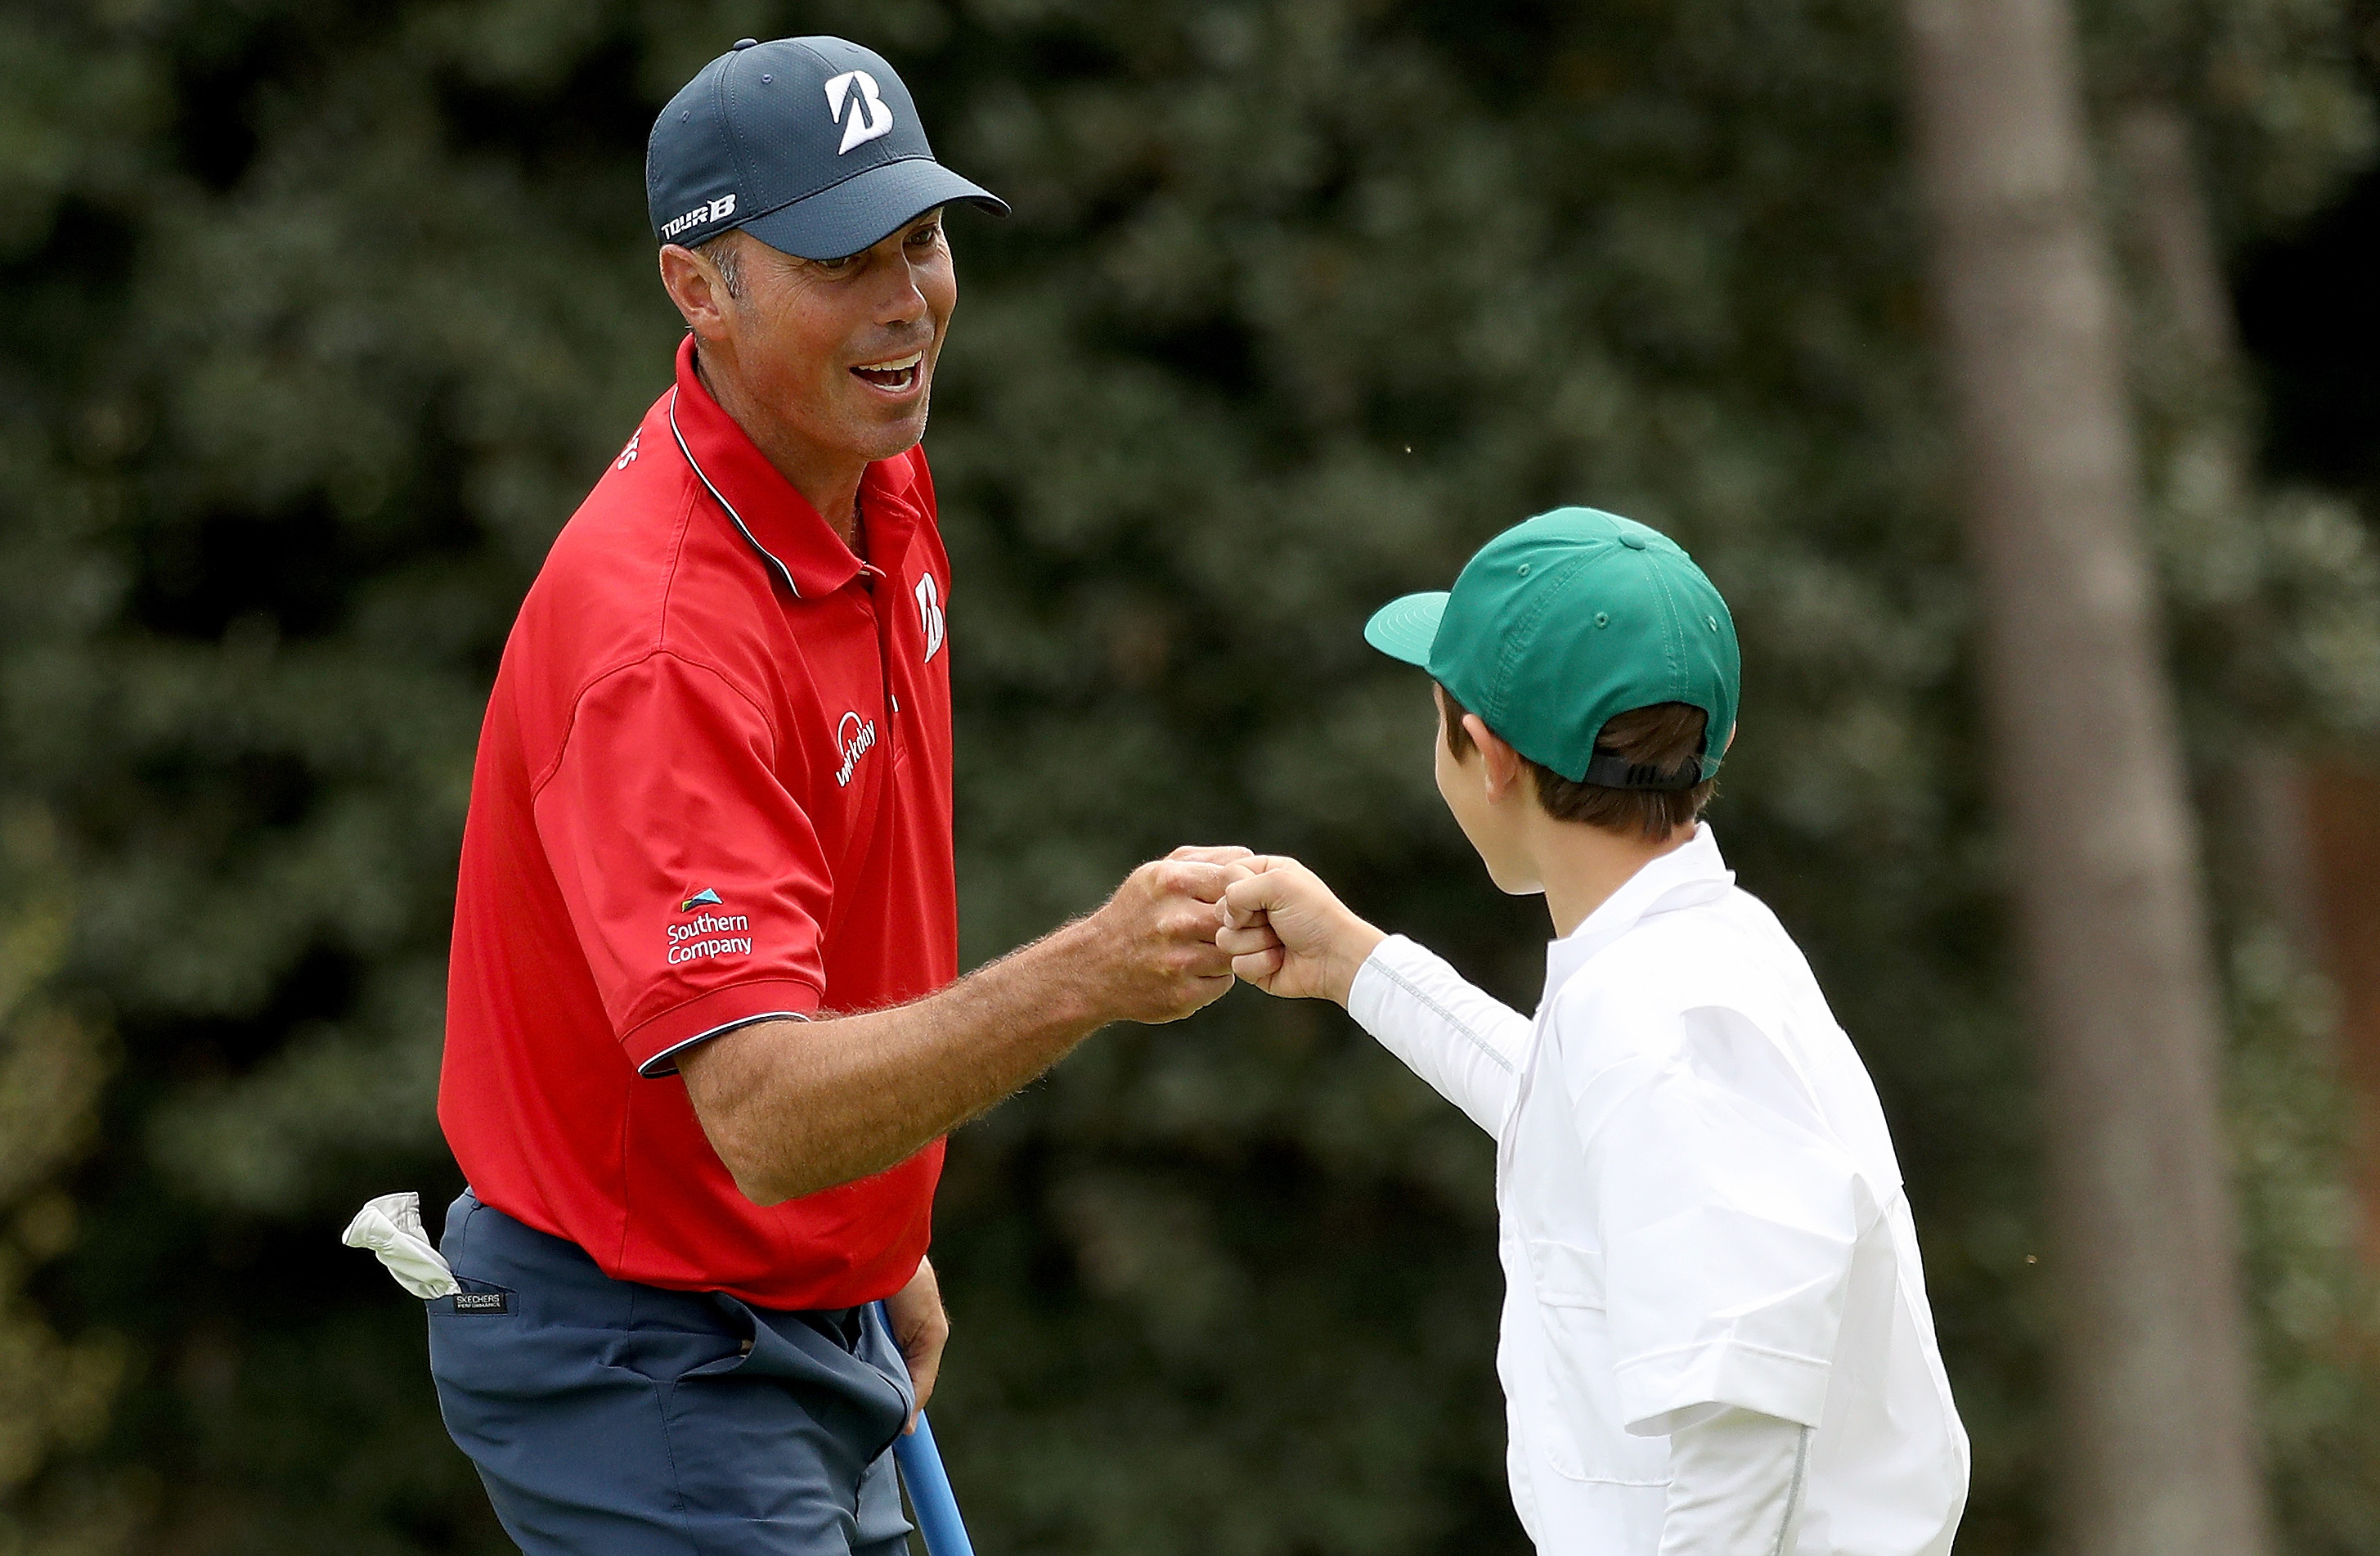 So Matt Kuchar does apparently get angry...